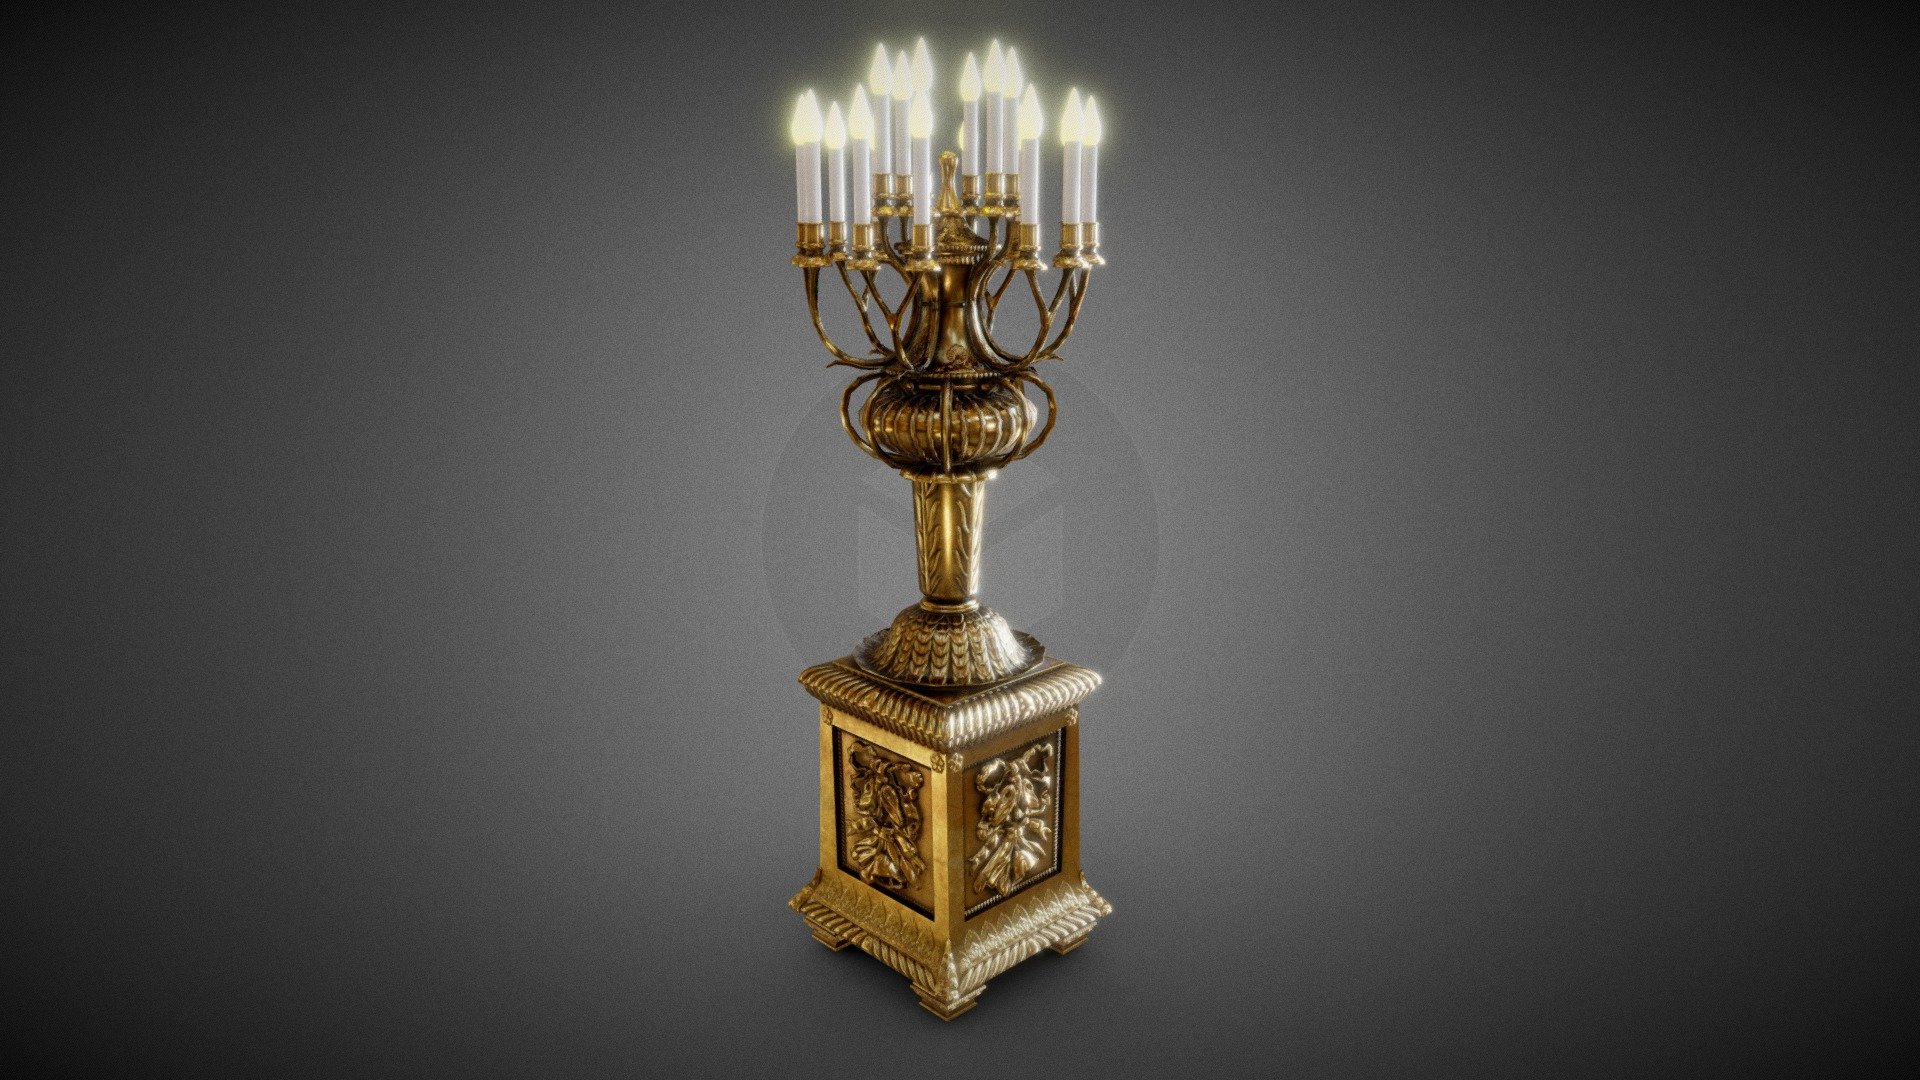 Real recontruction of Antique Titanic Lamp, modelled in Blender 2.9, texturing in Substance Painter
Game Ready 3D model, lowpoly 2K PBR Texture  (if you buy 50 dollars worth of 3d models, i will send you 2 models of your choice for free) - Titanic Lamp - Buy Royalty Free 3D model by carlcapu9 3d model